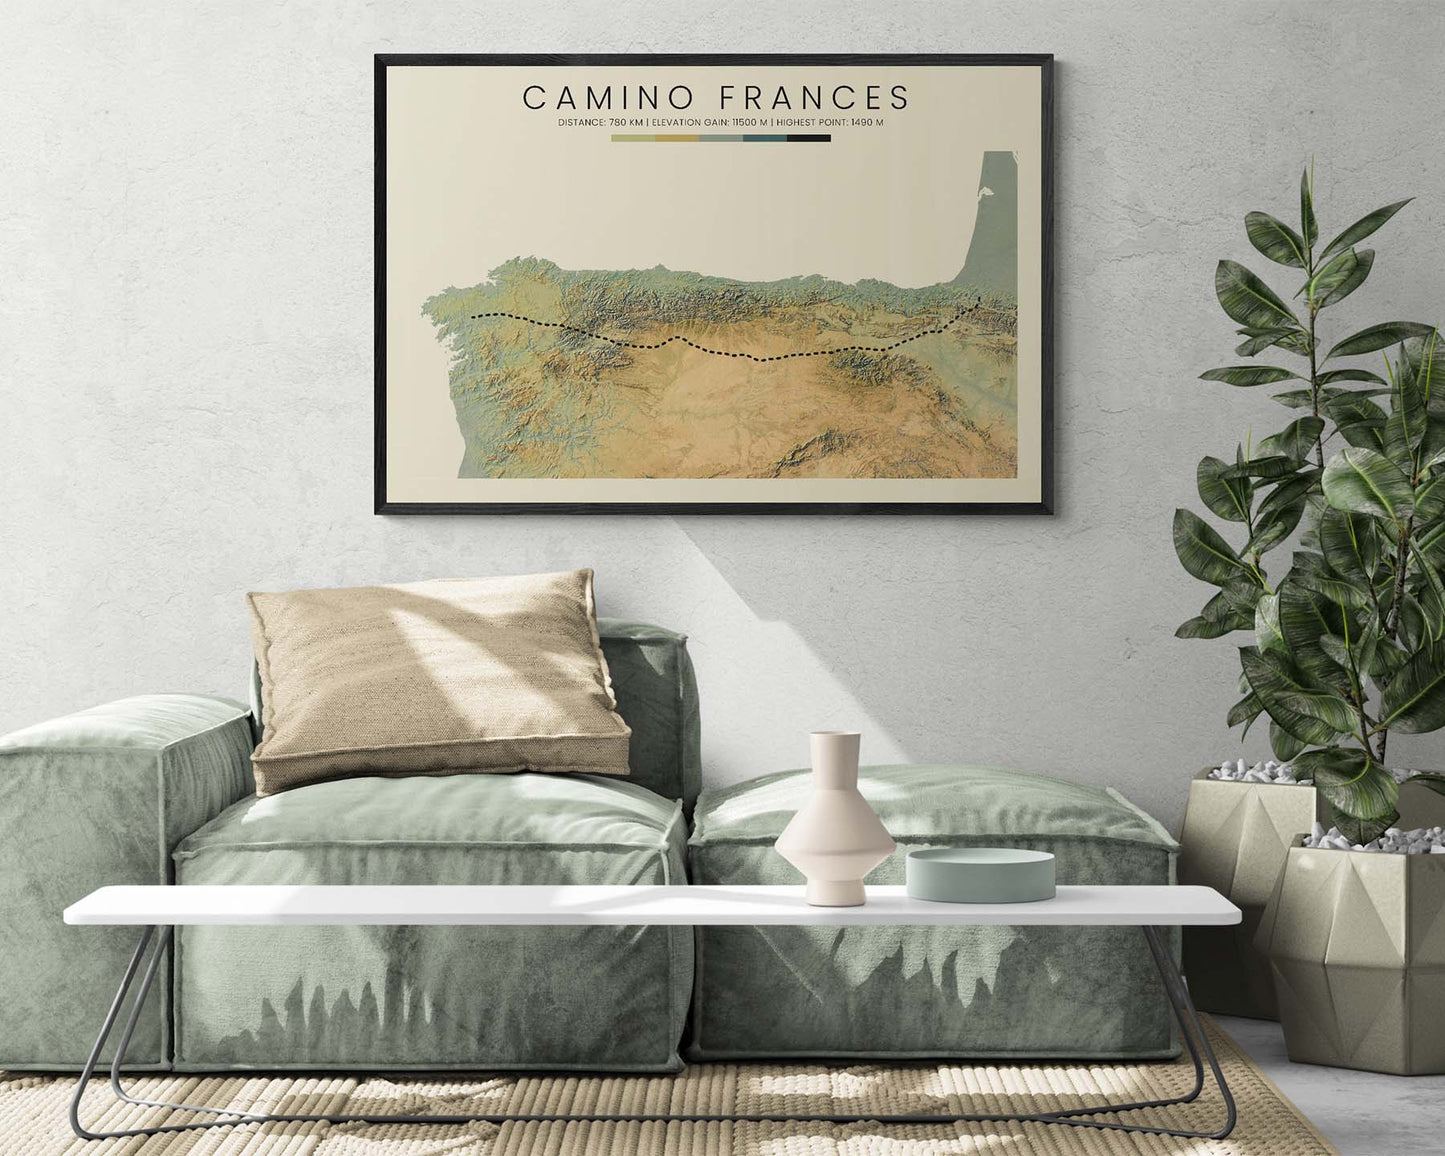 Camino Frances (Spain) Thru-Hike Wall Decor with Shaded Relief Map in Modern Room Decor